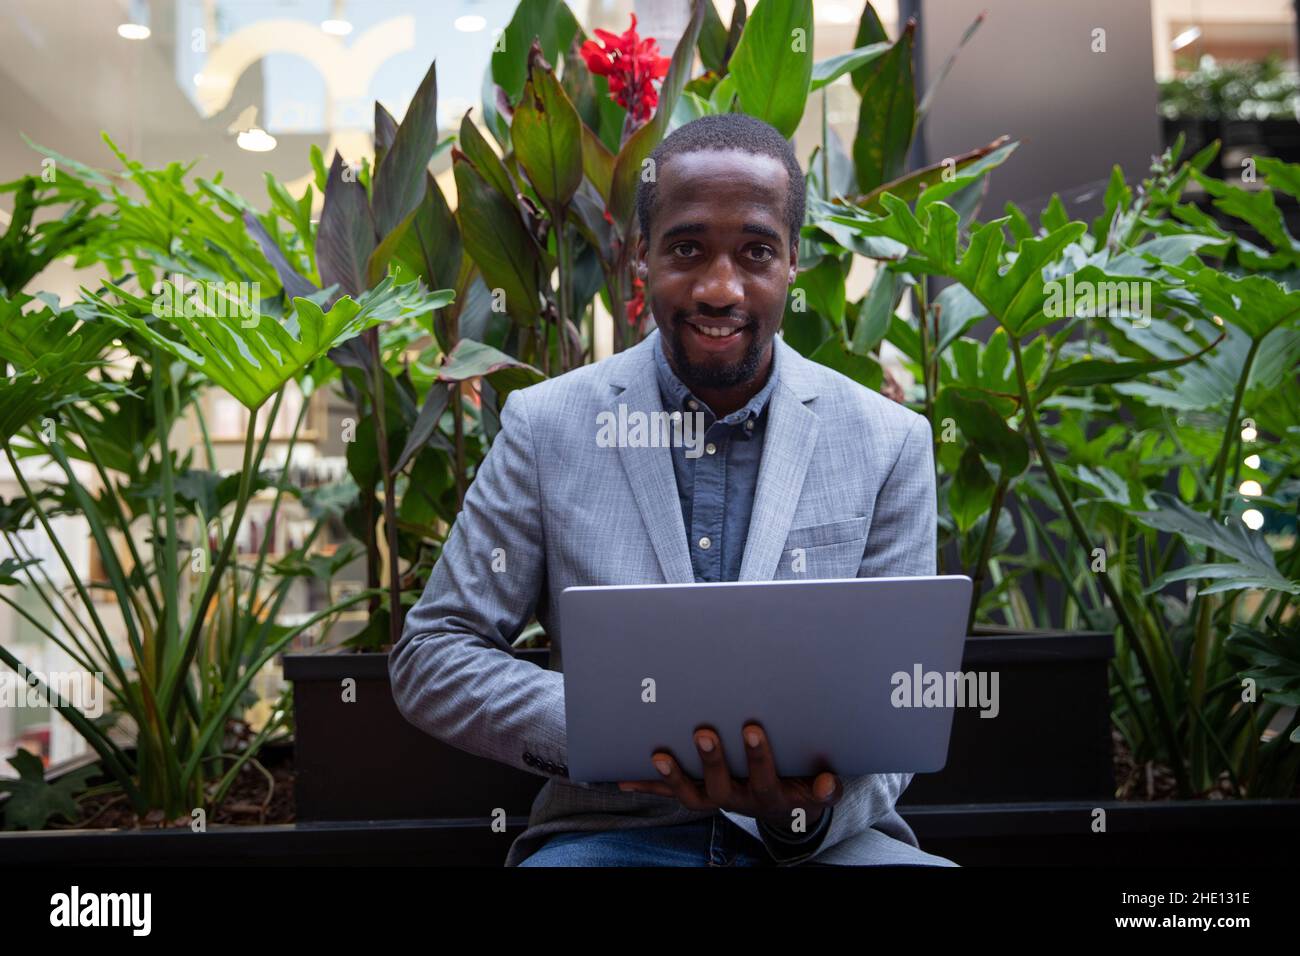 African businessman sitting on a bench works with his laptop. Successful person with confidant look smiles. Businessman works outdoors Stock Photo